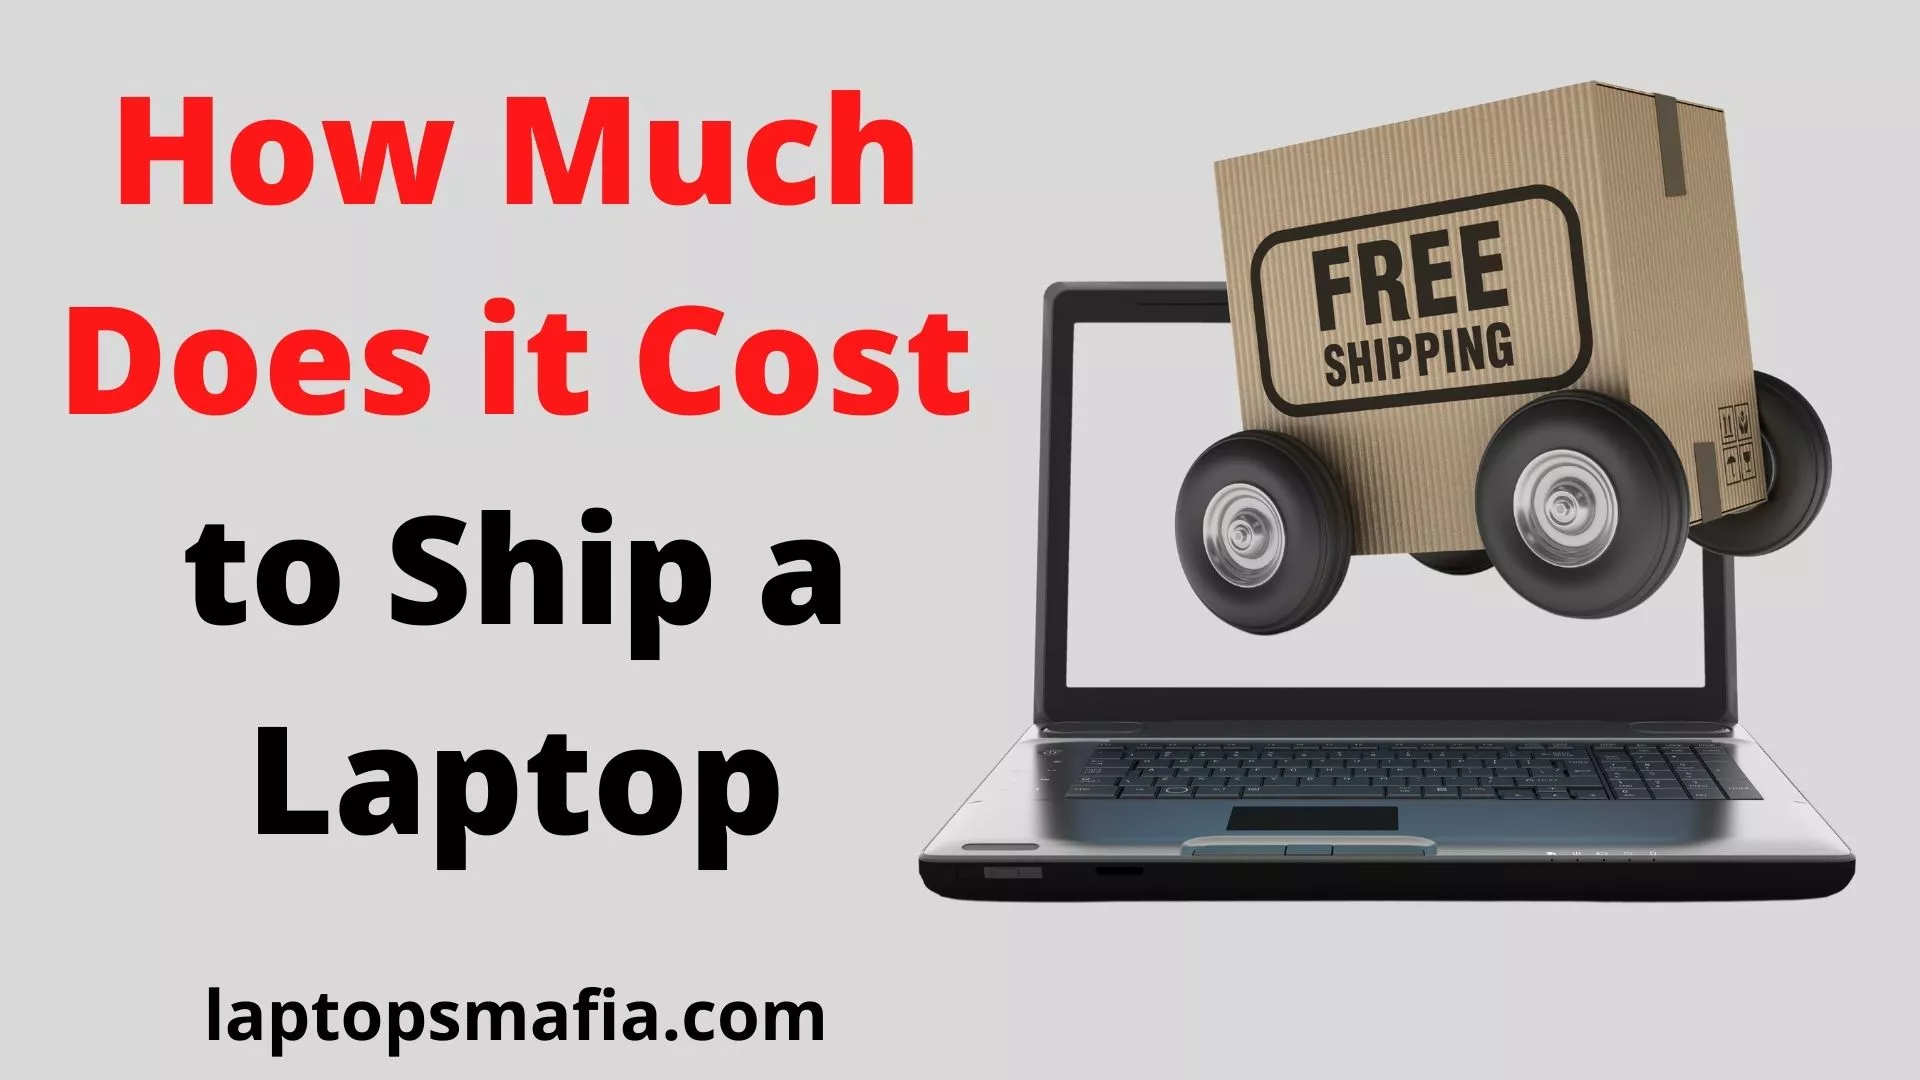 How Much Does it Cost to Ship a Laptop